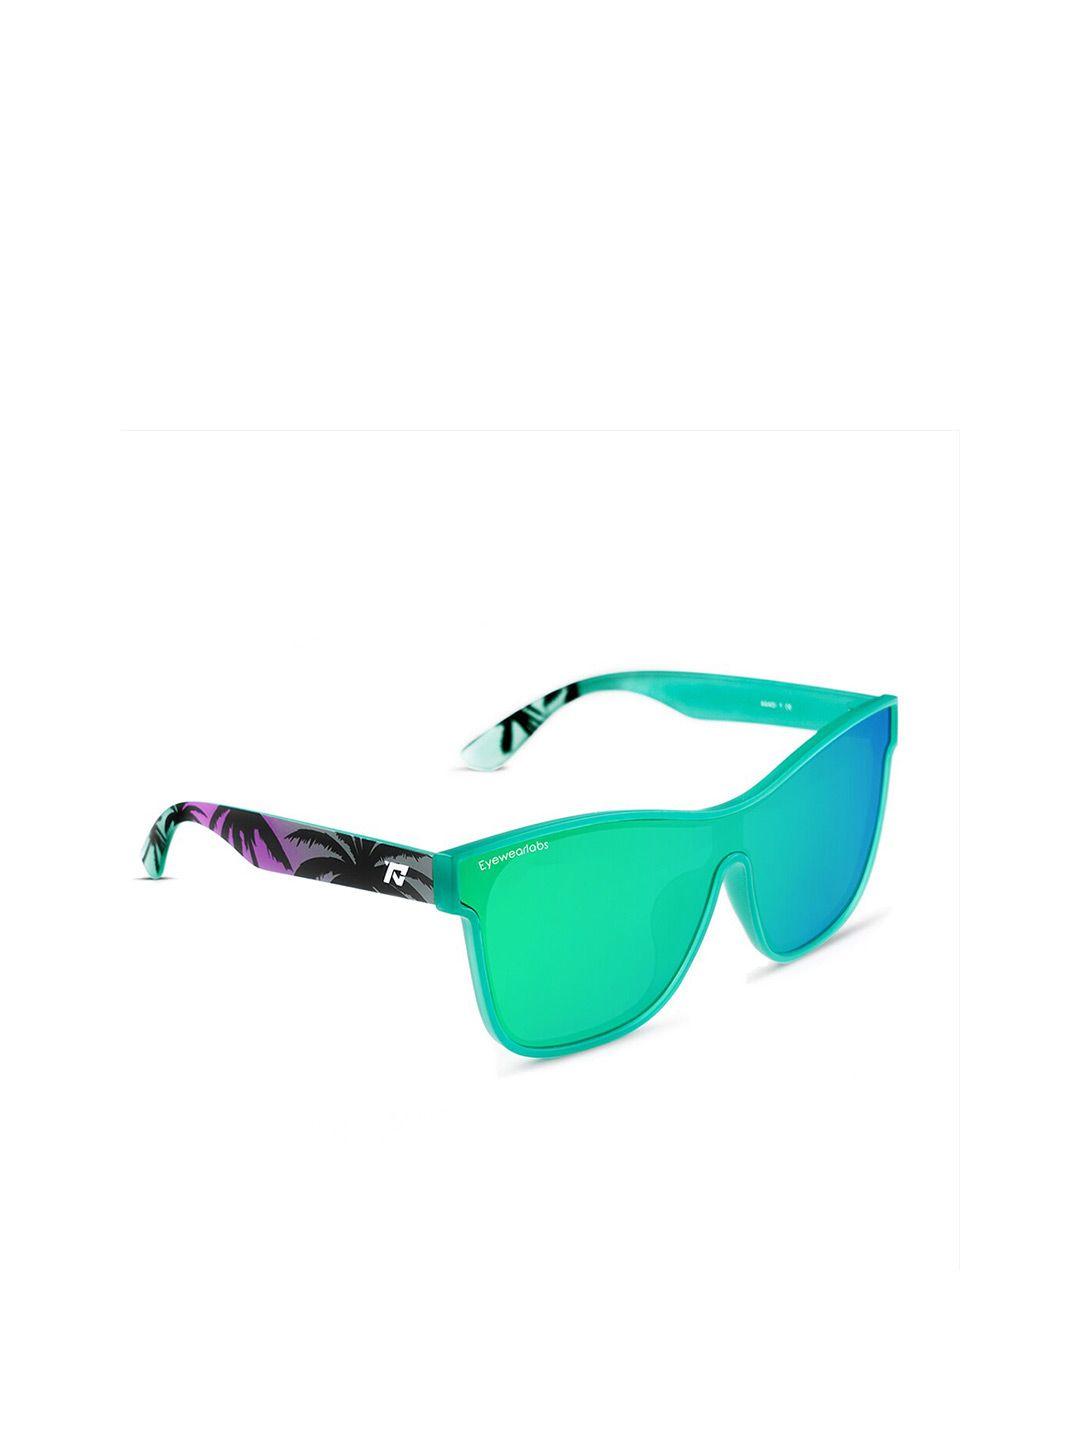 eyewearlabs shield sunglasses with polarised and uv protected lens